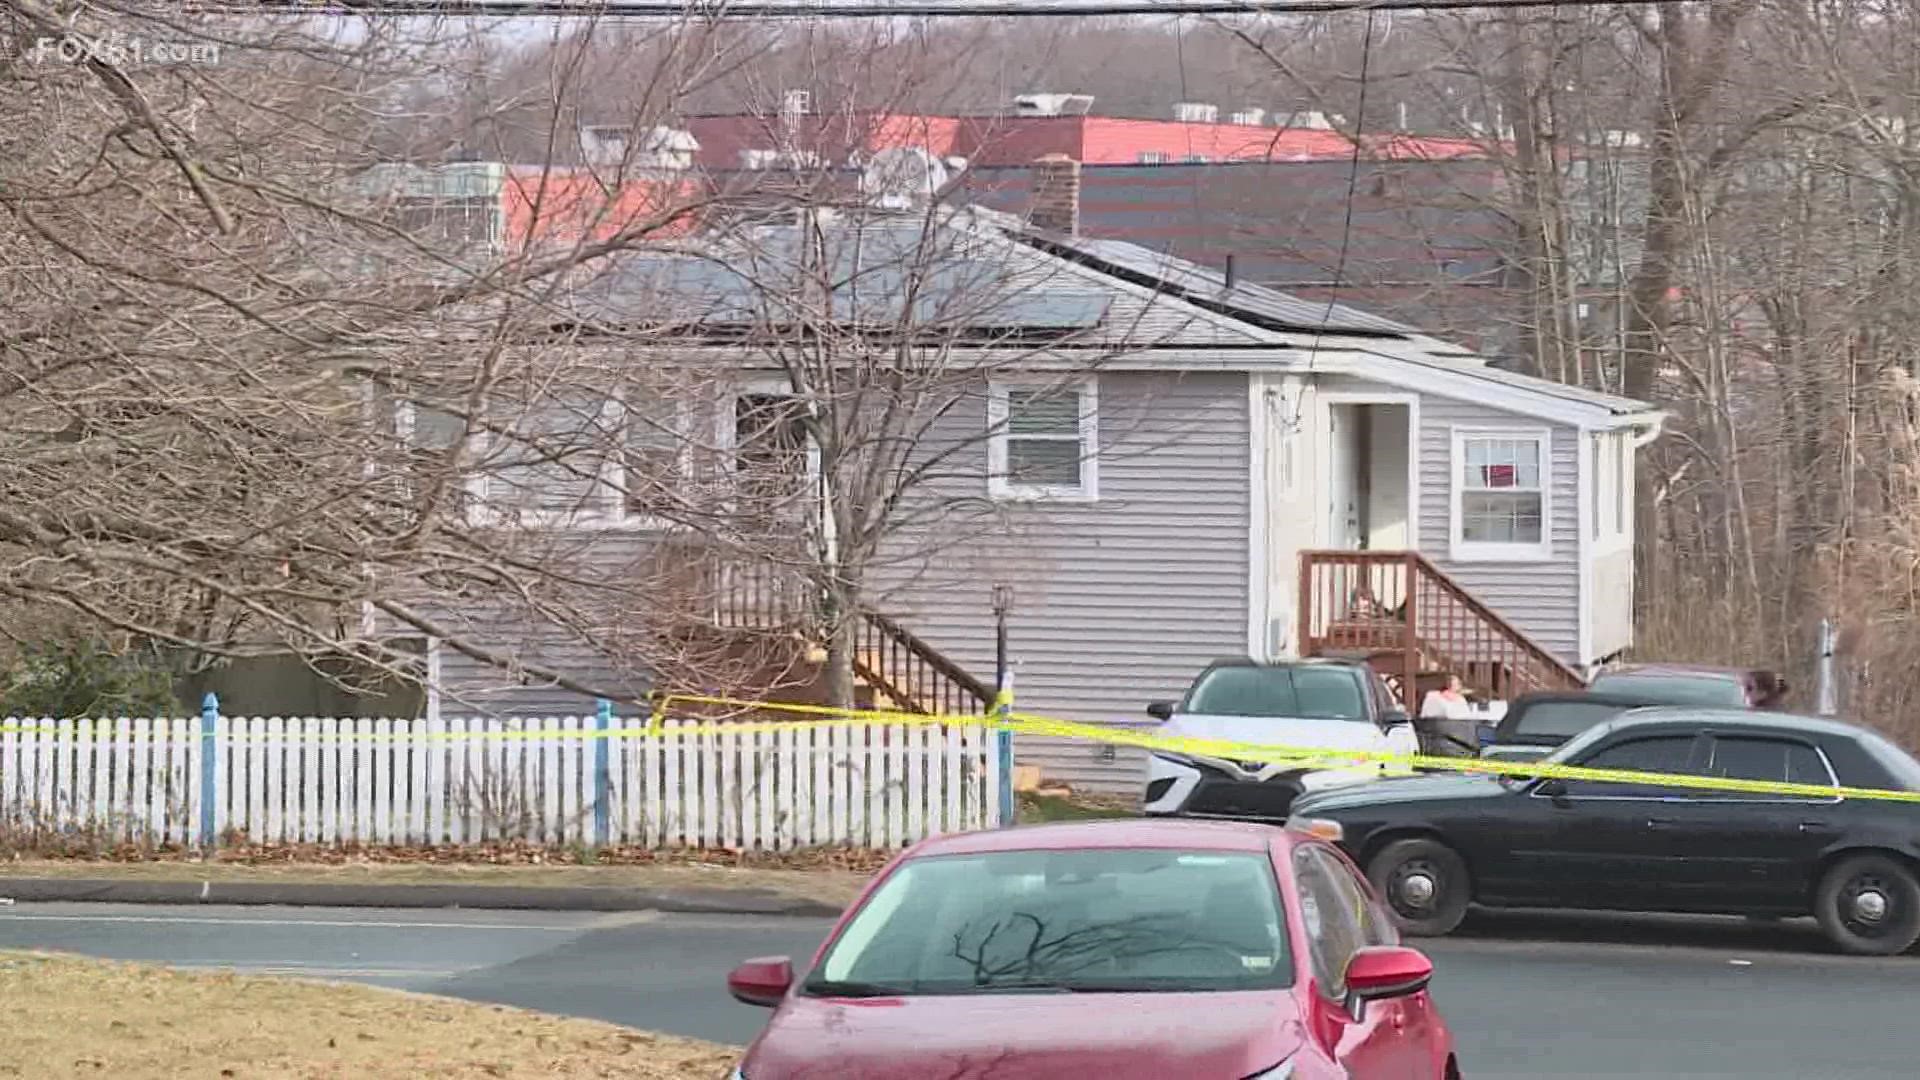 Police said the man was found inside the home with a gunshot wound. He later died at the hospital.